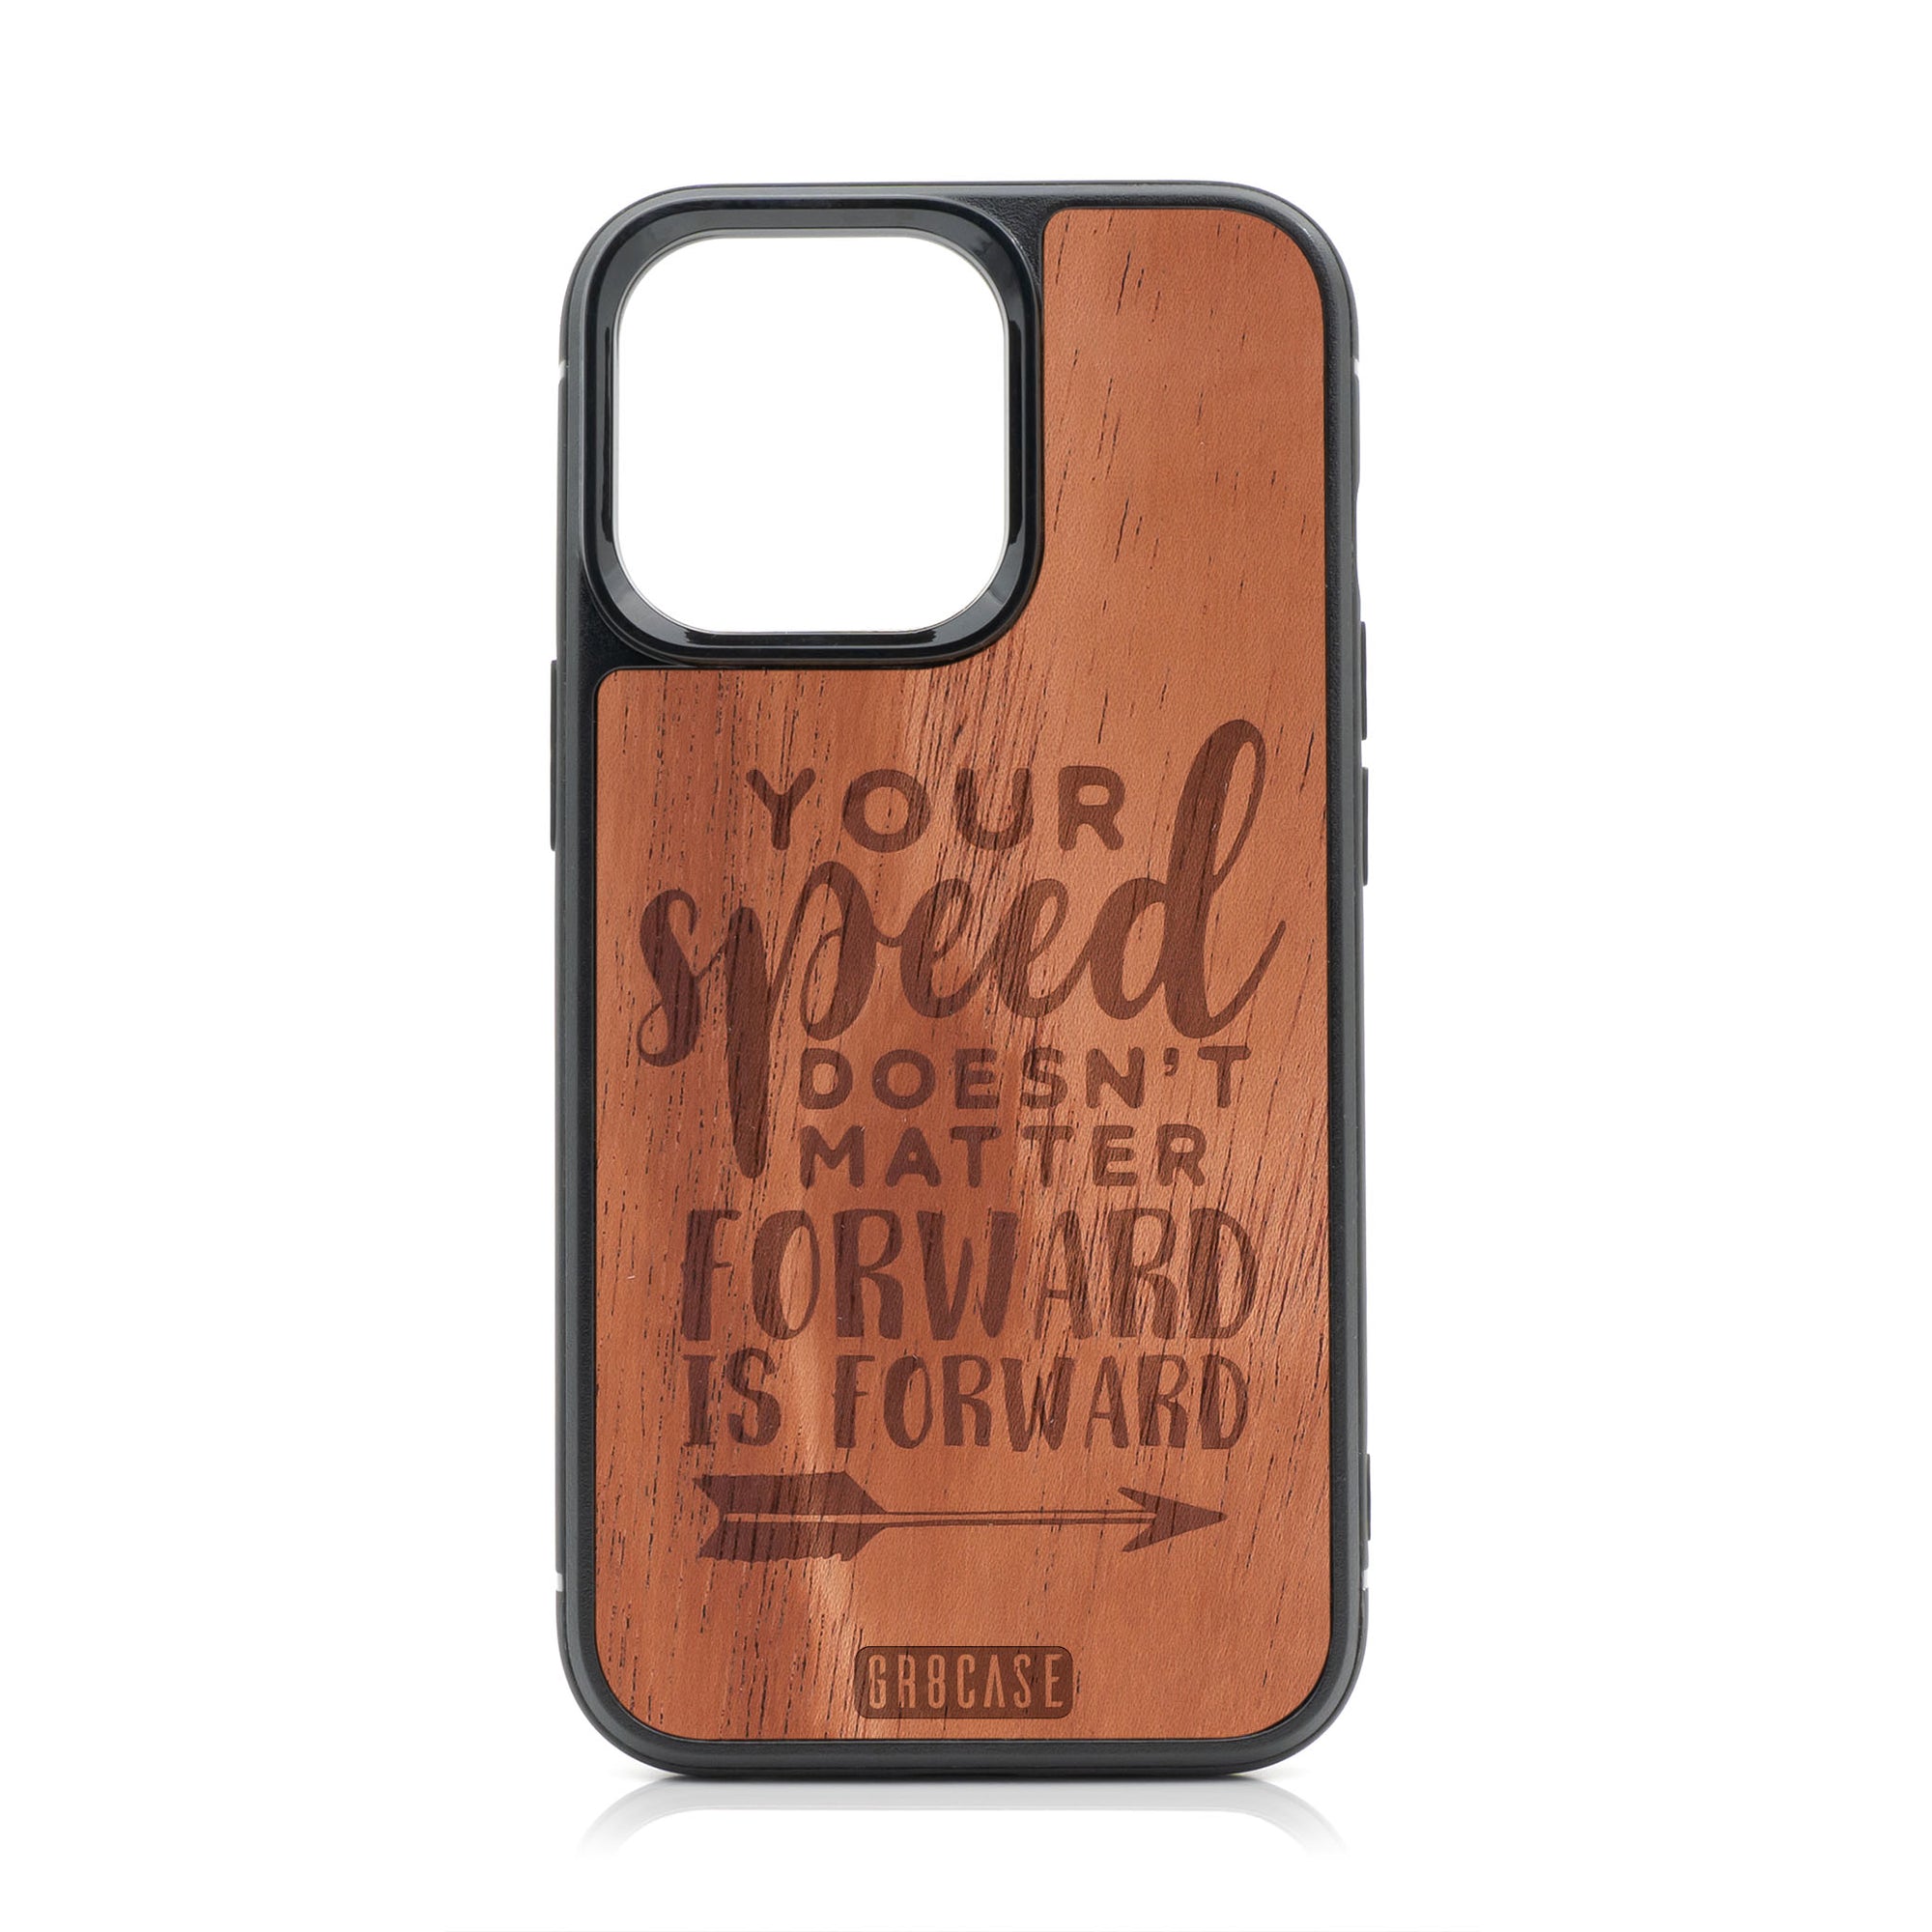 Your Speed Doesn't Matter Forward Is Forward Design Wood Case For iPhone 13 Pro